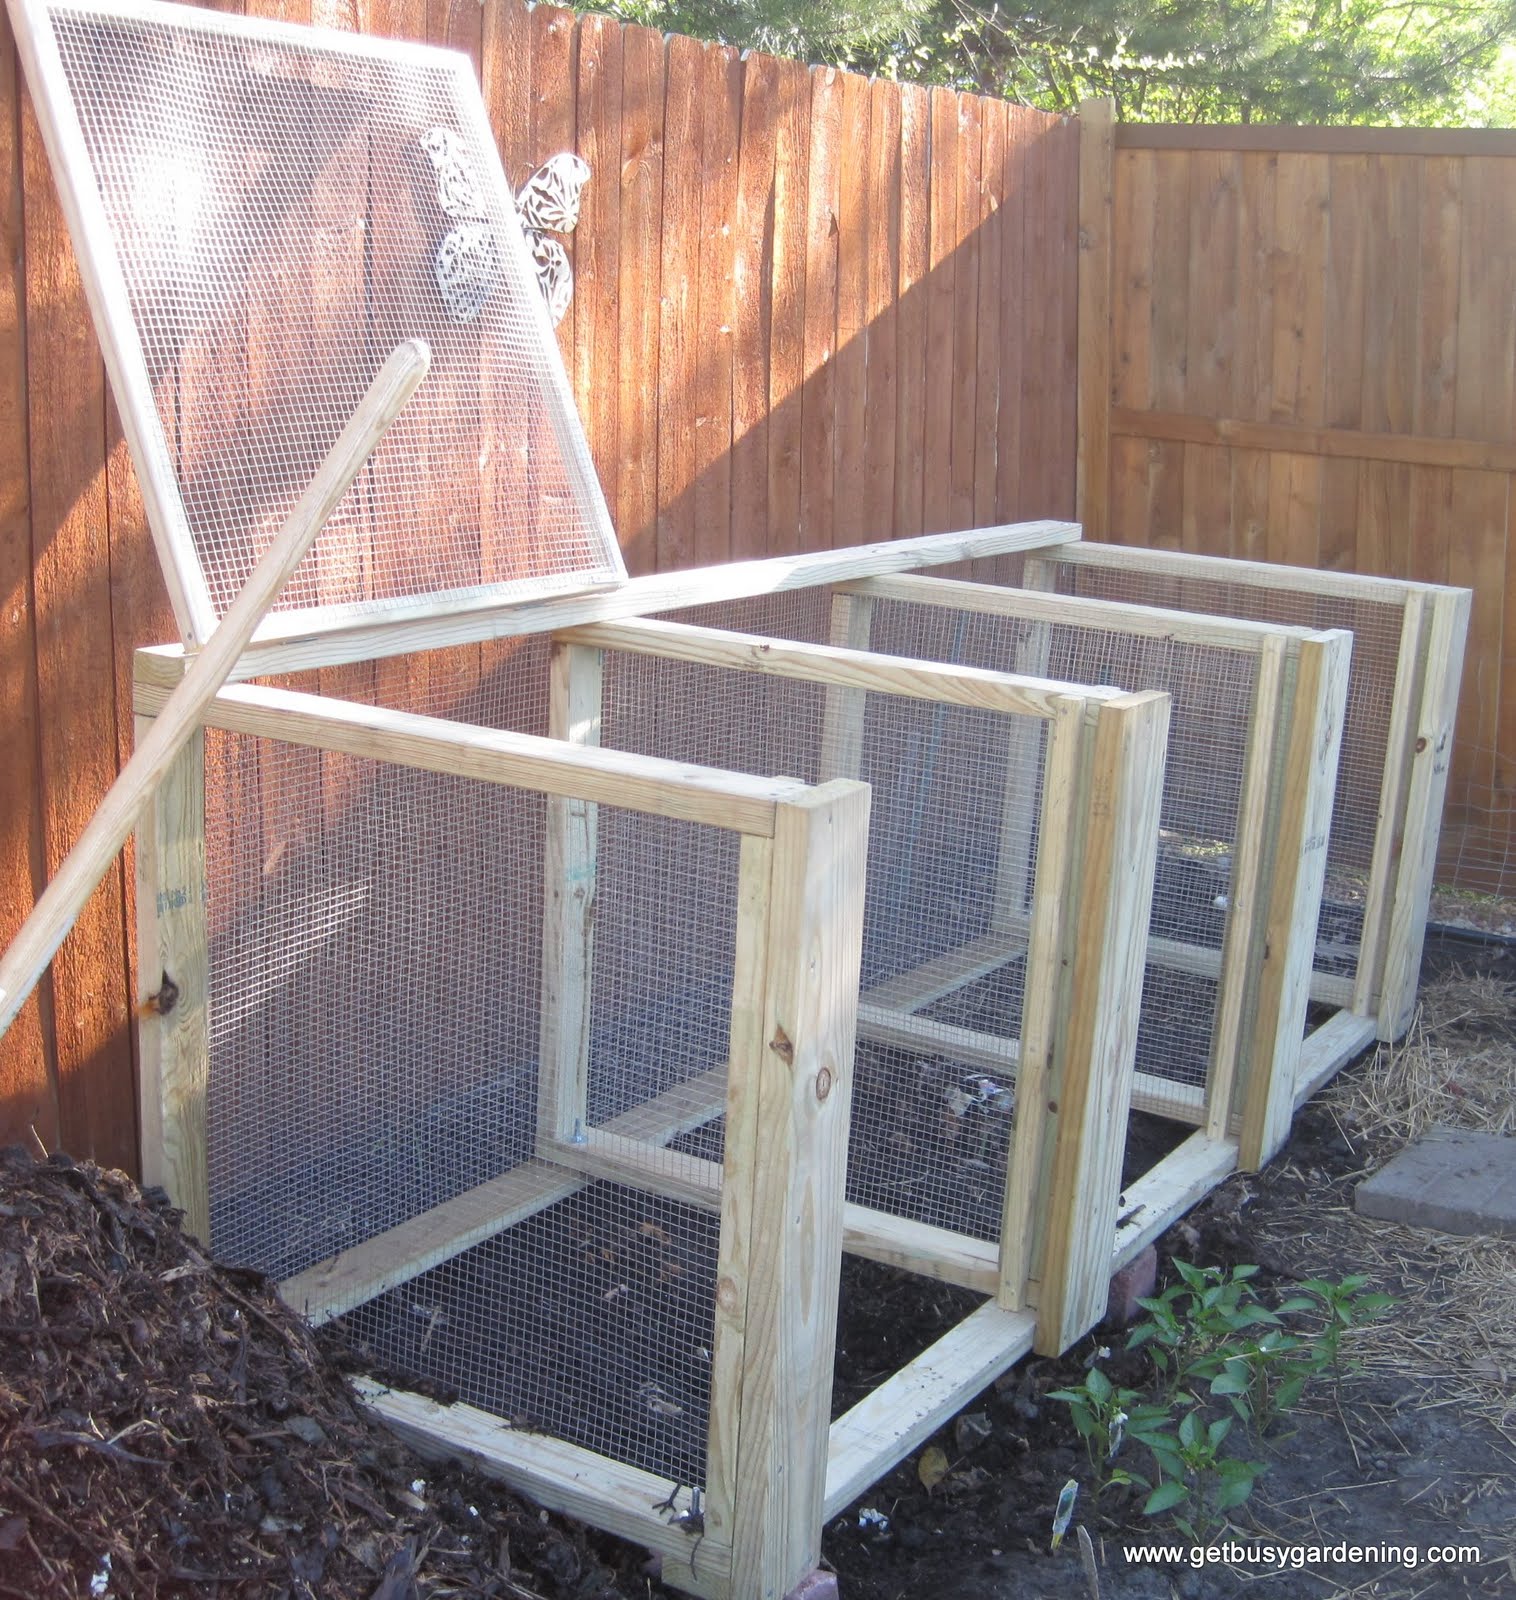 Weekend Project: Large Compost Bin - Get Busy Gardening